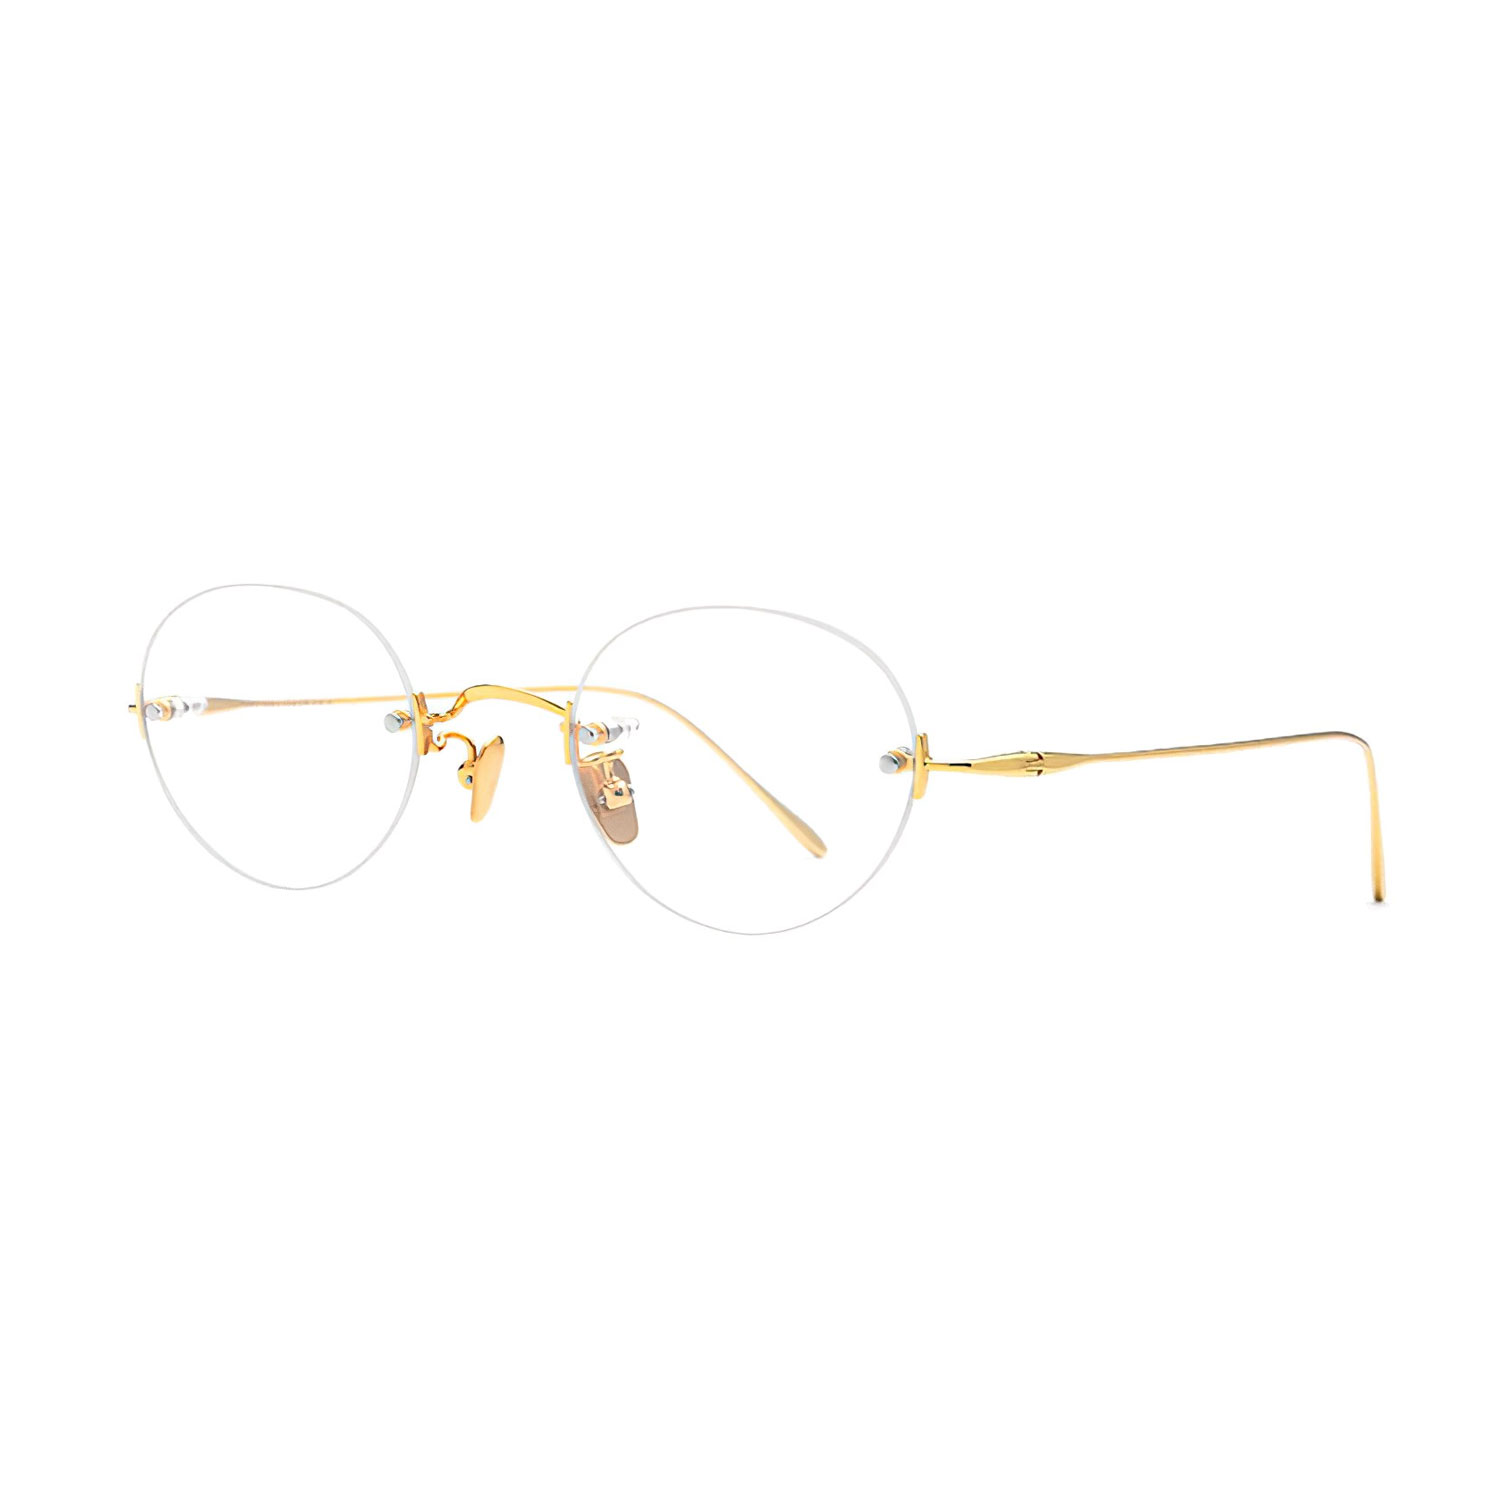 Rimless frames made out of metal alloy for women. It comes adjustable  silicone nose pads and acetate temple tips. Thi…